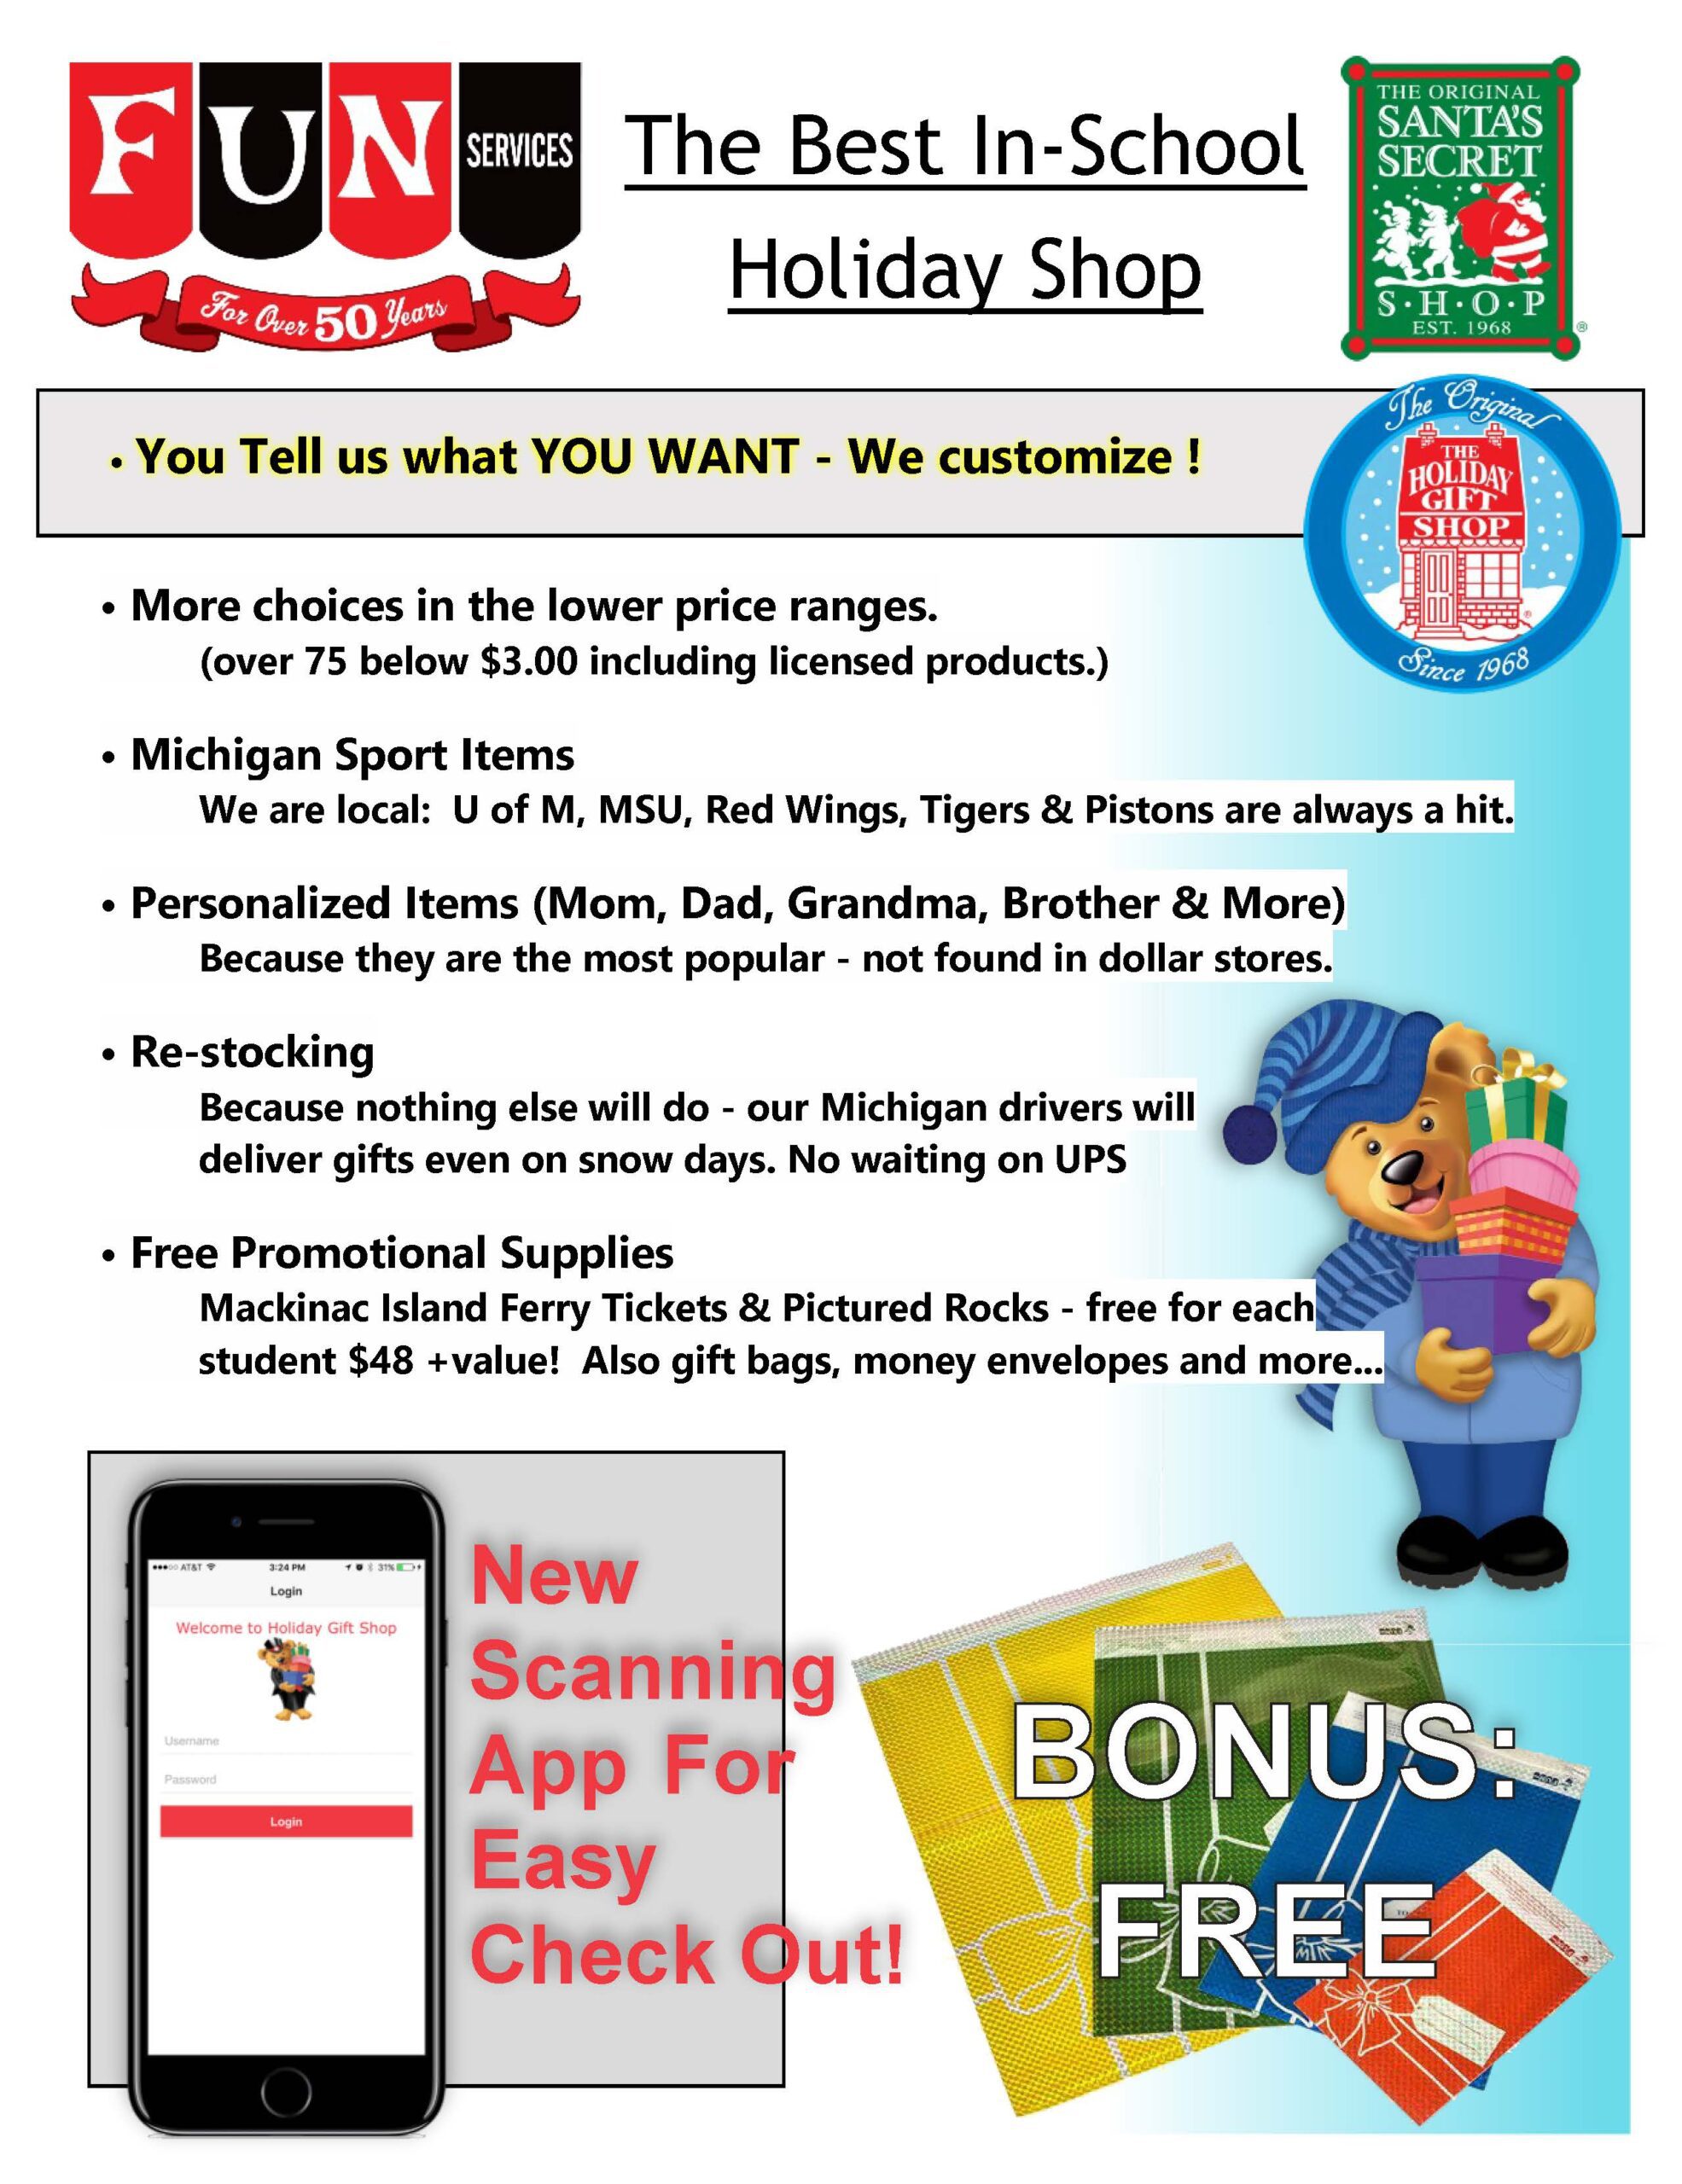 Michigan Owned and Operated Dare to compare the best in school holiday gift shop free gift bags scanning app free ferry tickets